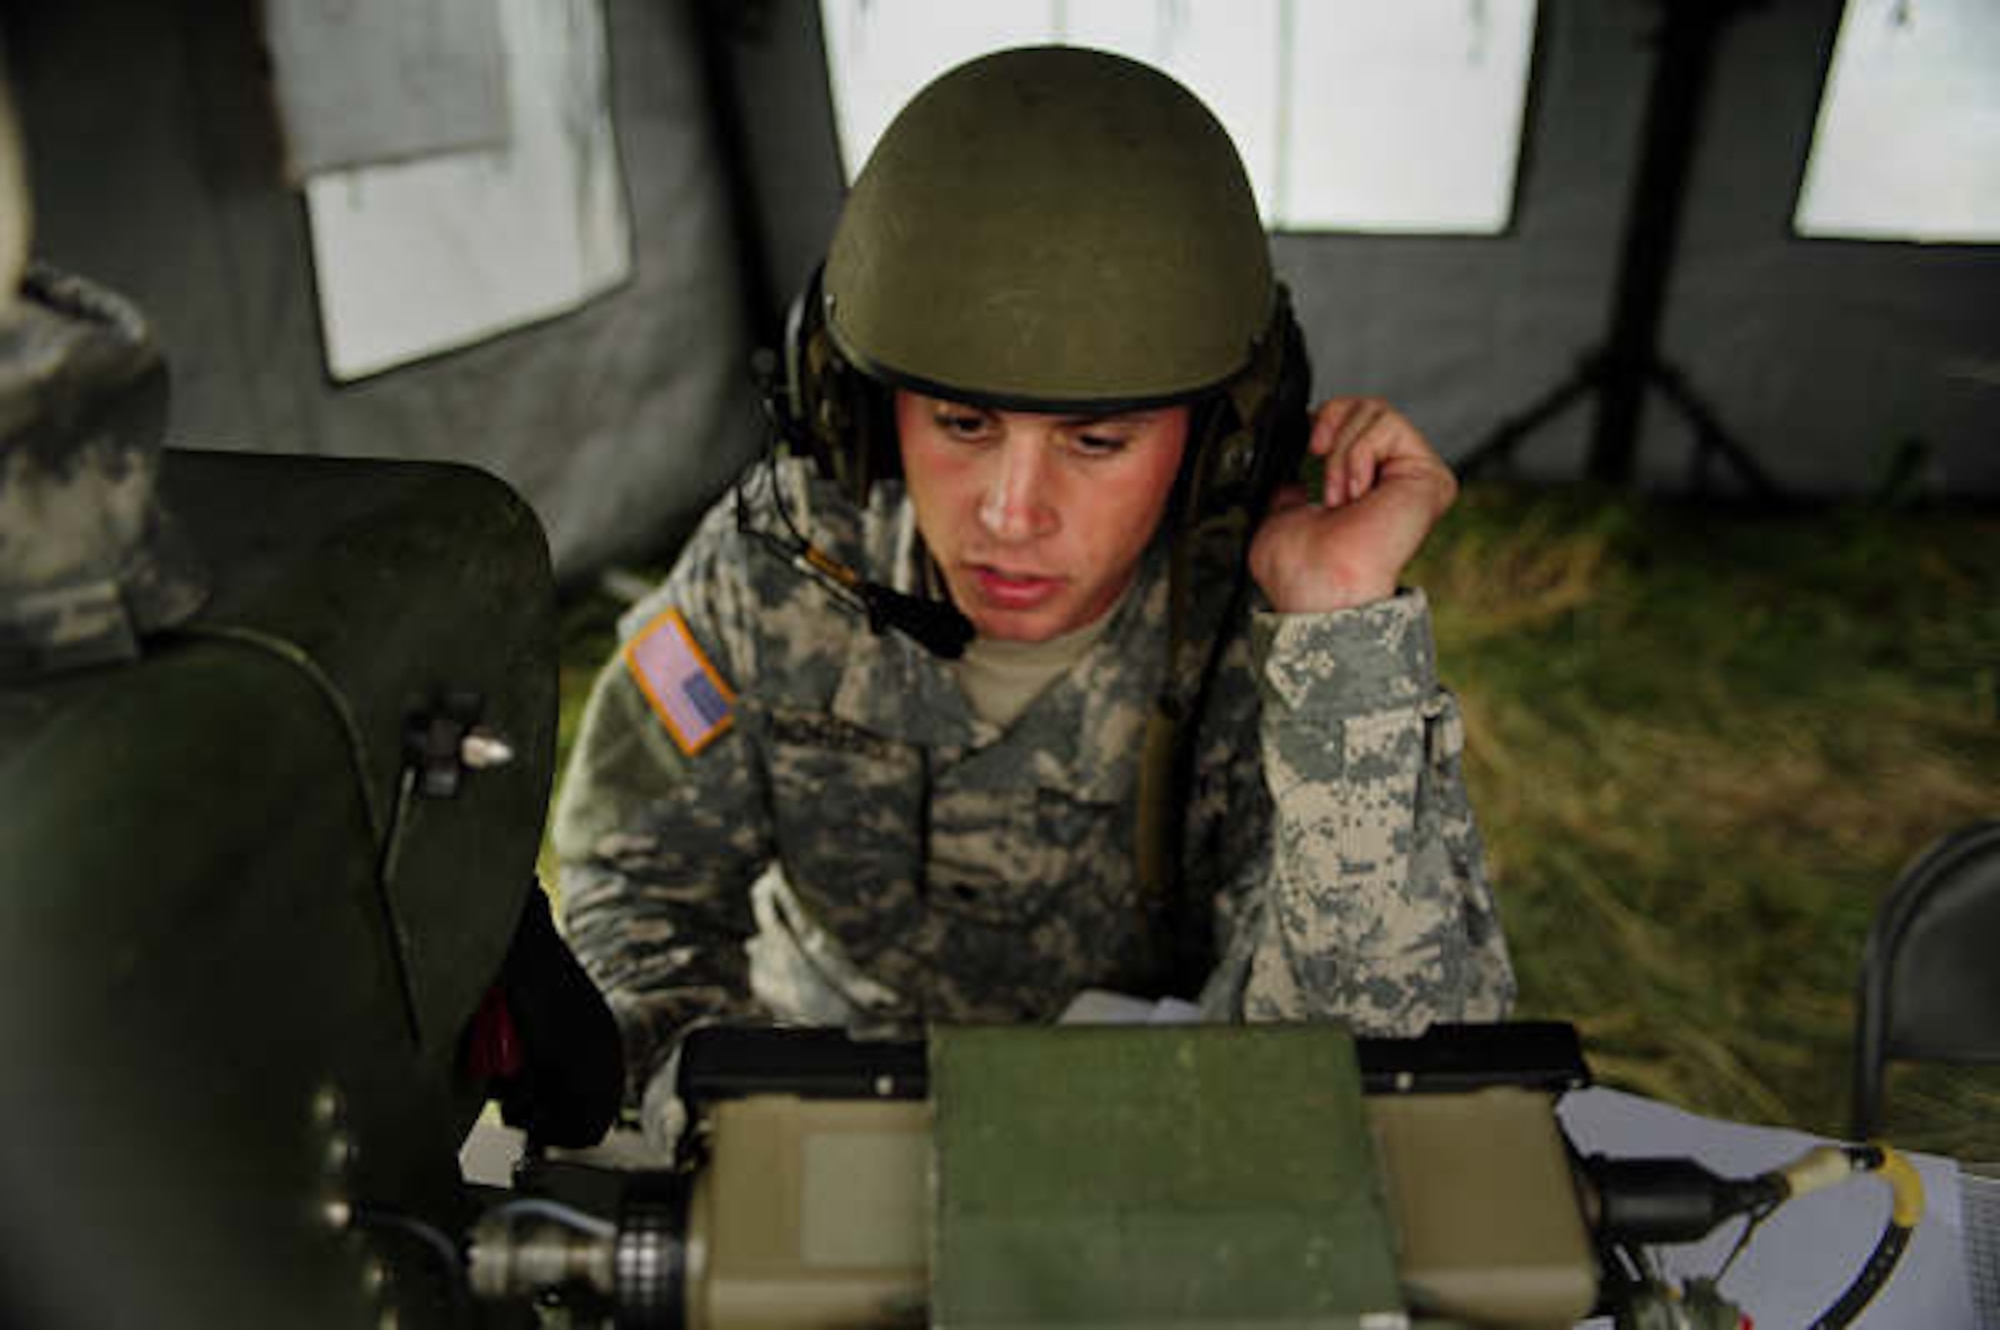 U.S. Army Specialist Randall Norris, Avenger Crewman, 263rd Anti-Air Missile Defense Command, South Carolina National Guard, watches the radar in search of aircraft in the area during Exercise Amalgam Dart, Camp Rilea, Oregon, June 15, 2009.  (U.S. Air Force photo by Technical Sgt. Sean M. Worrell)